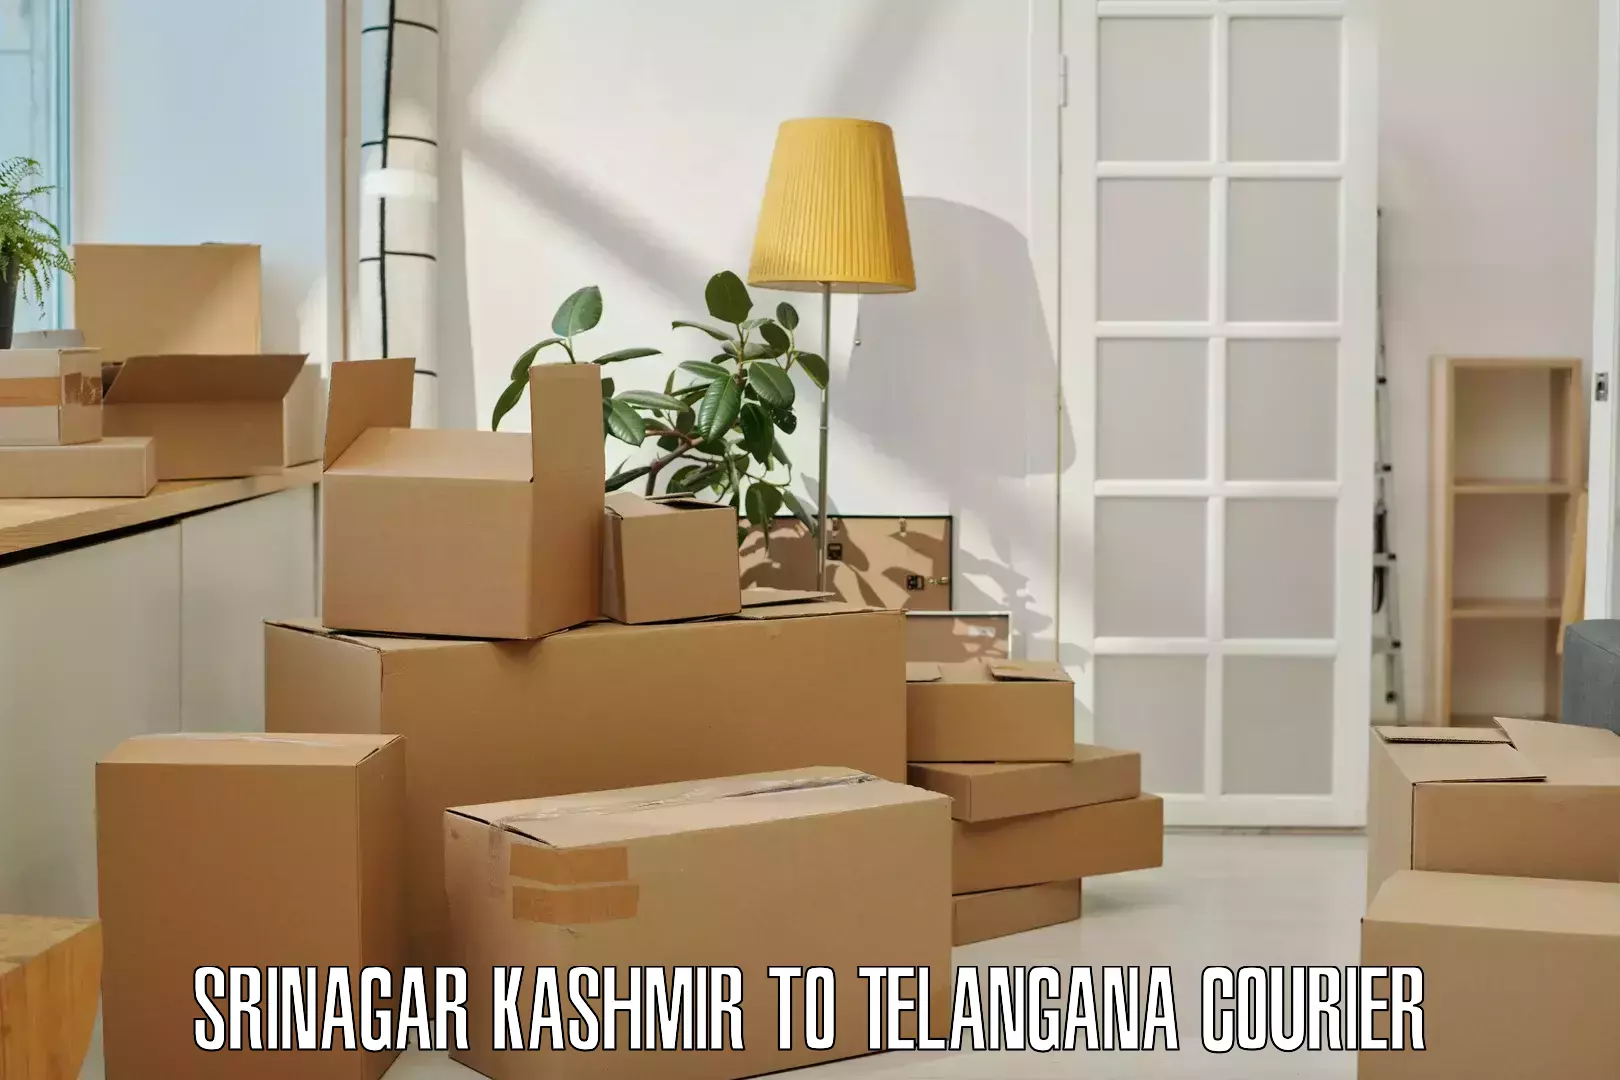 End-to-end delivery Srinagar Kashmir to Wanaparthy